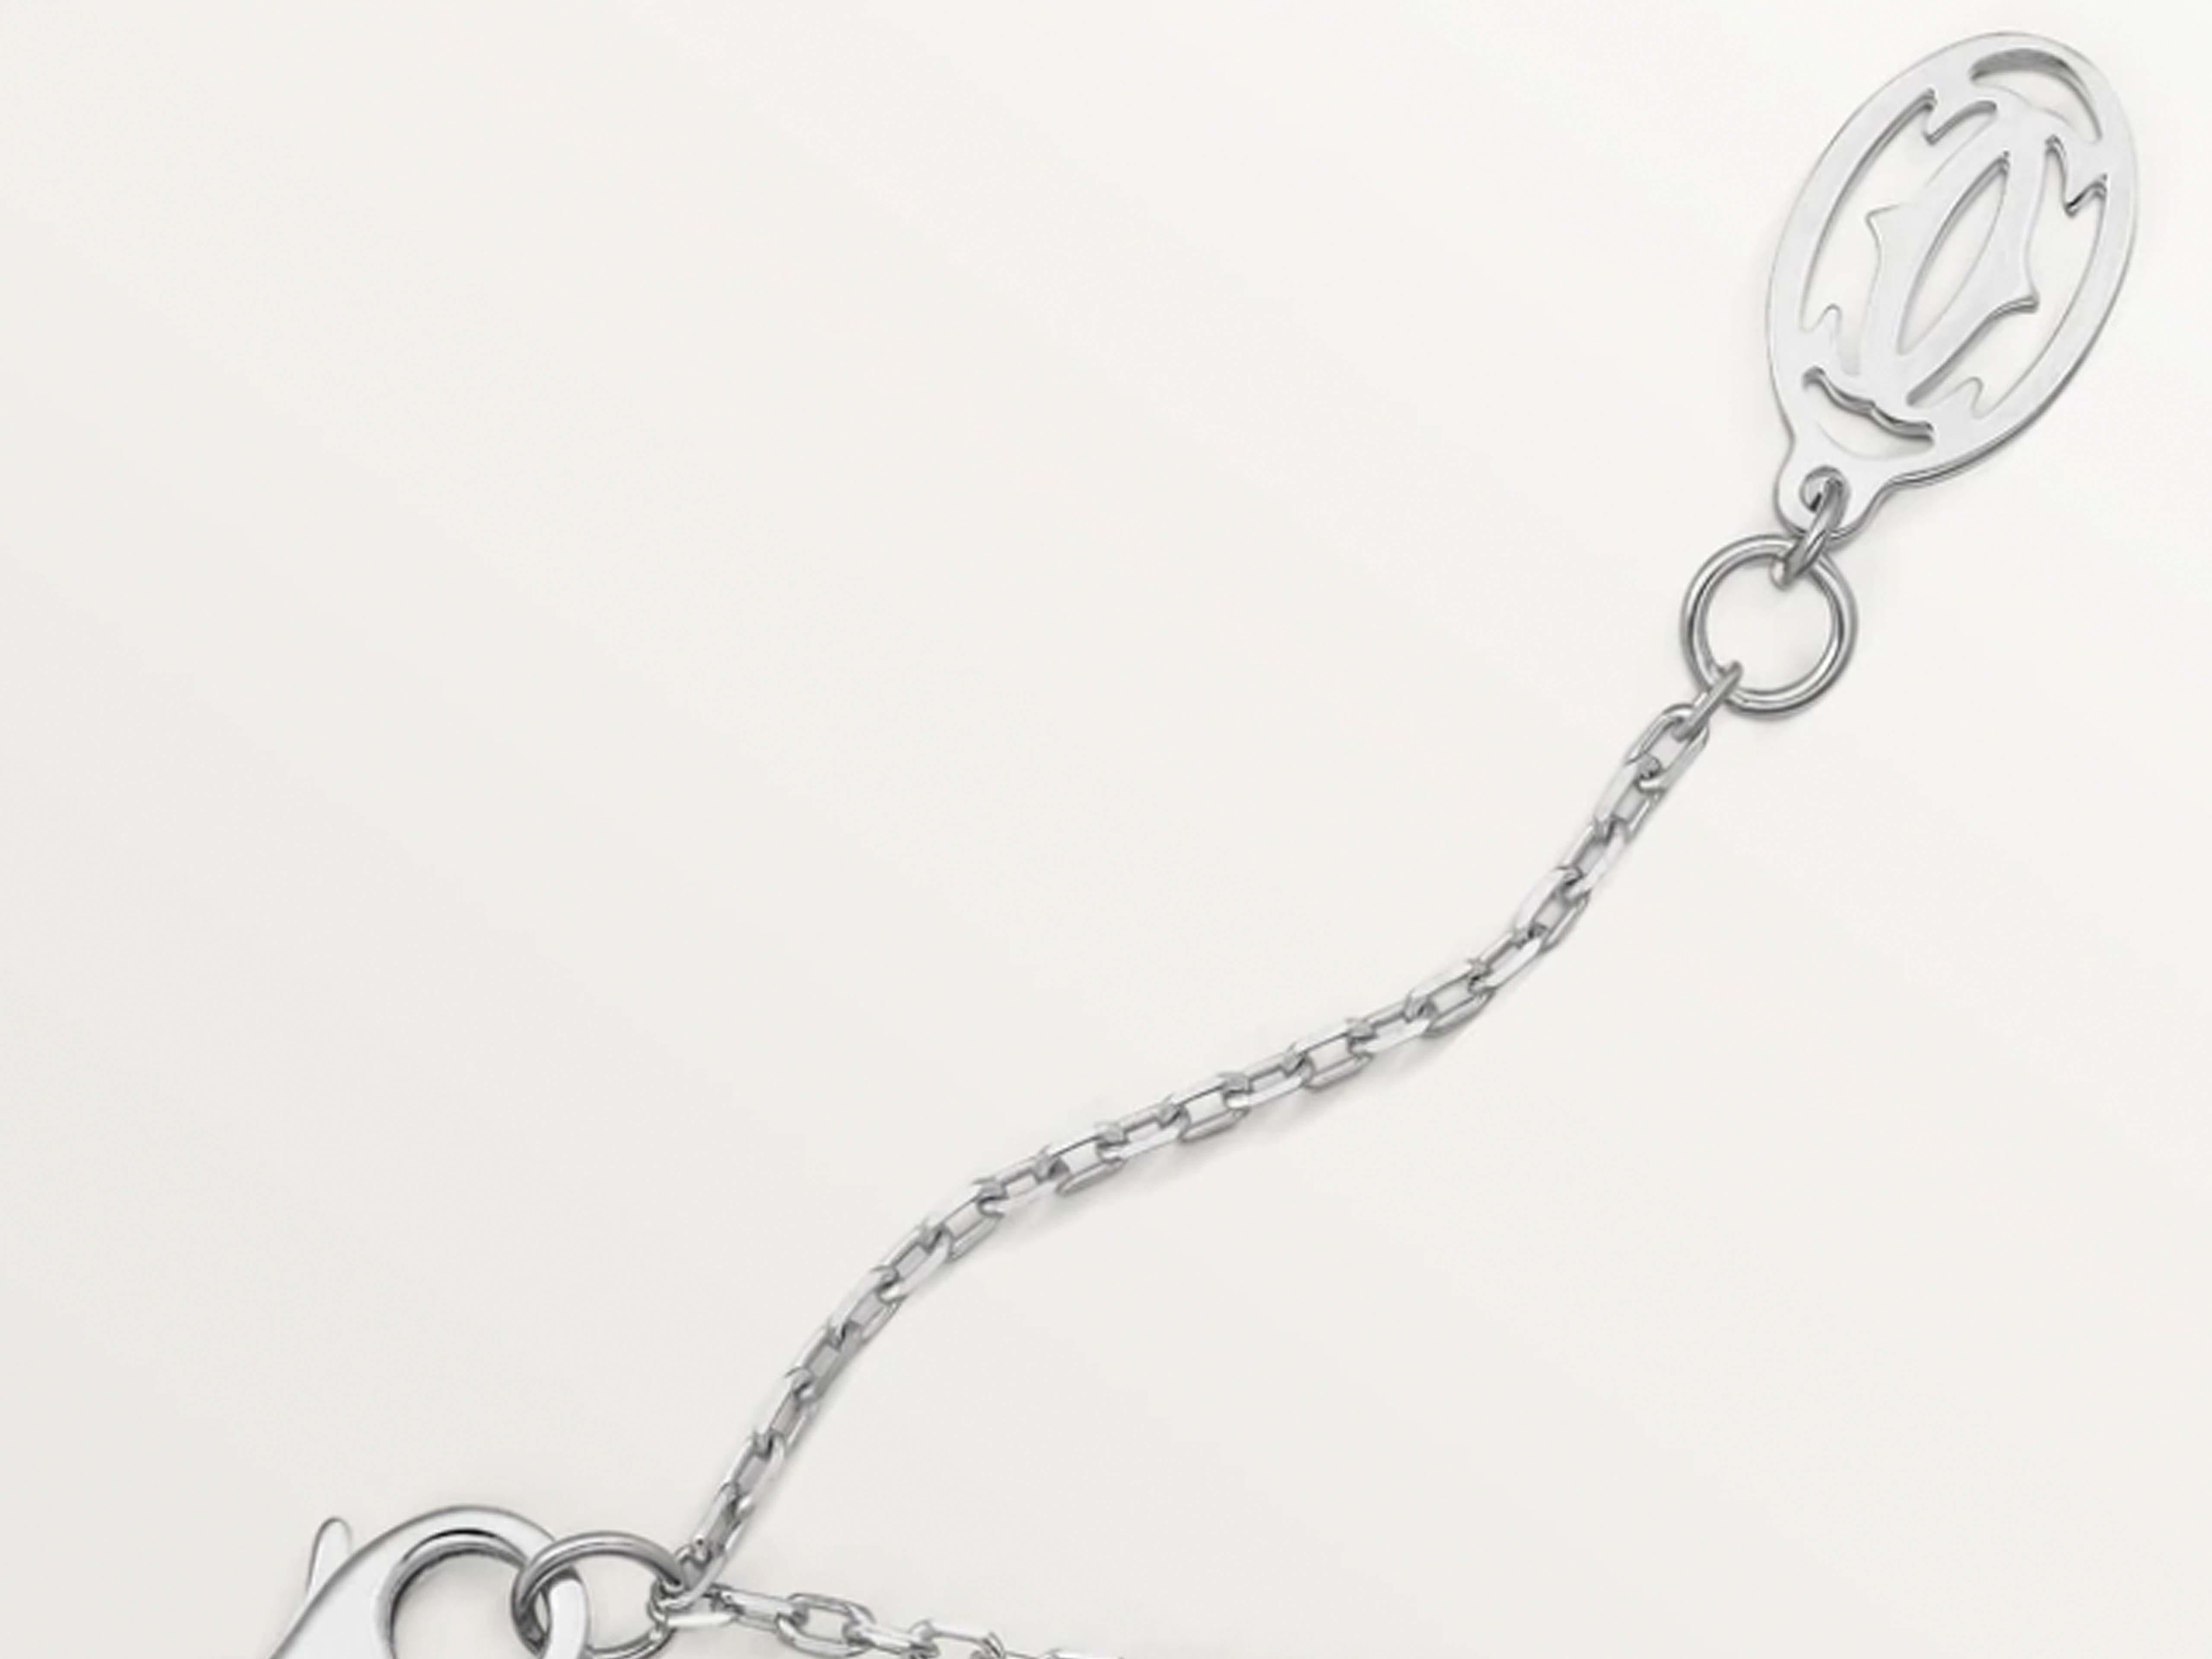 Women's Cartier D'amour Diamond Necklace in 18k White Gold